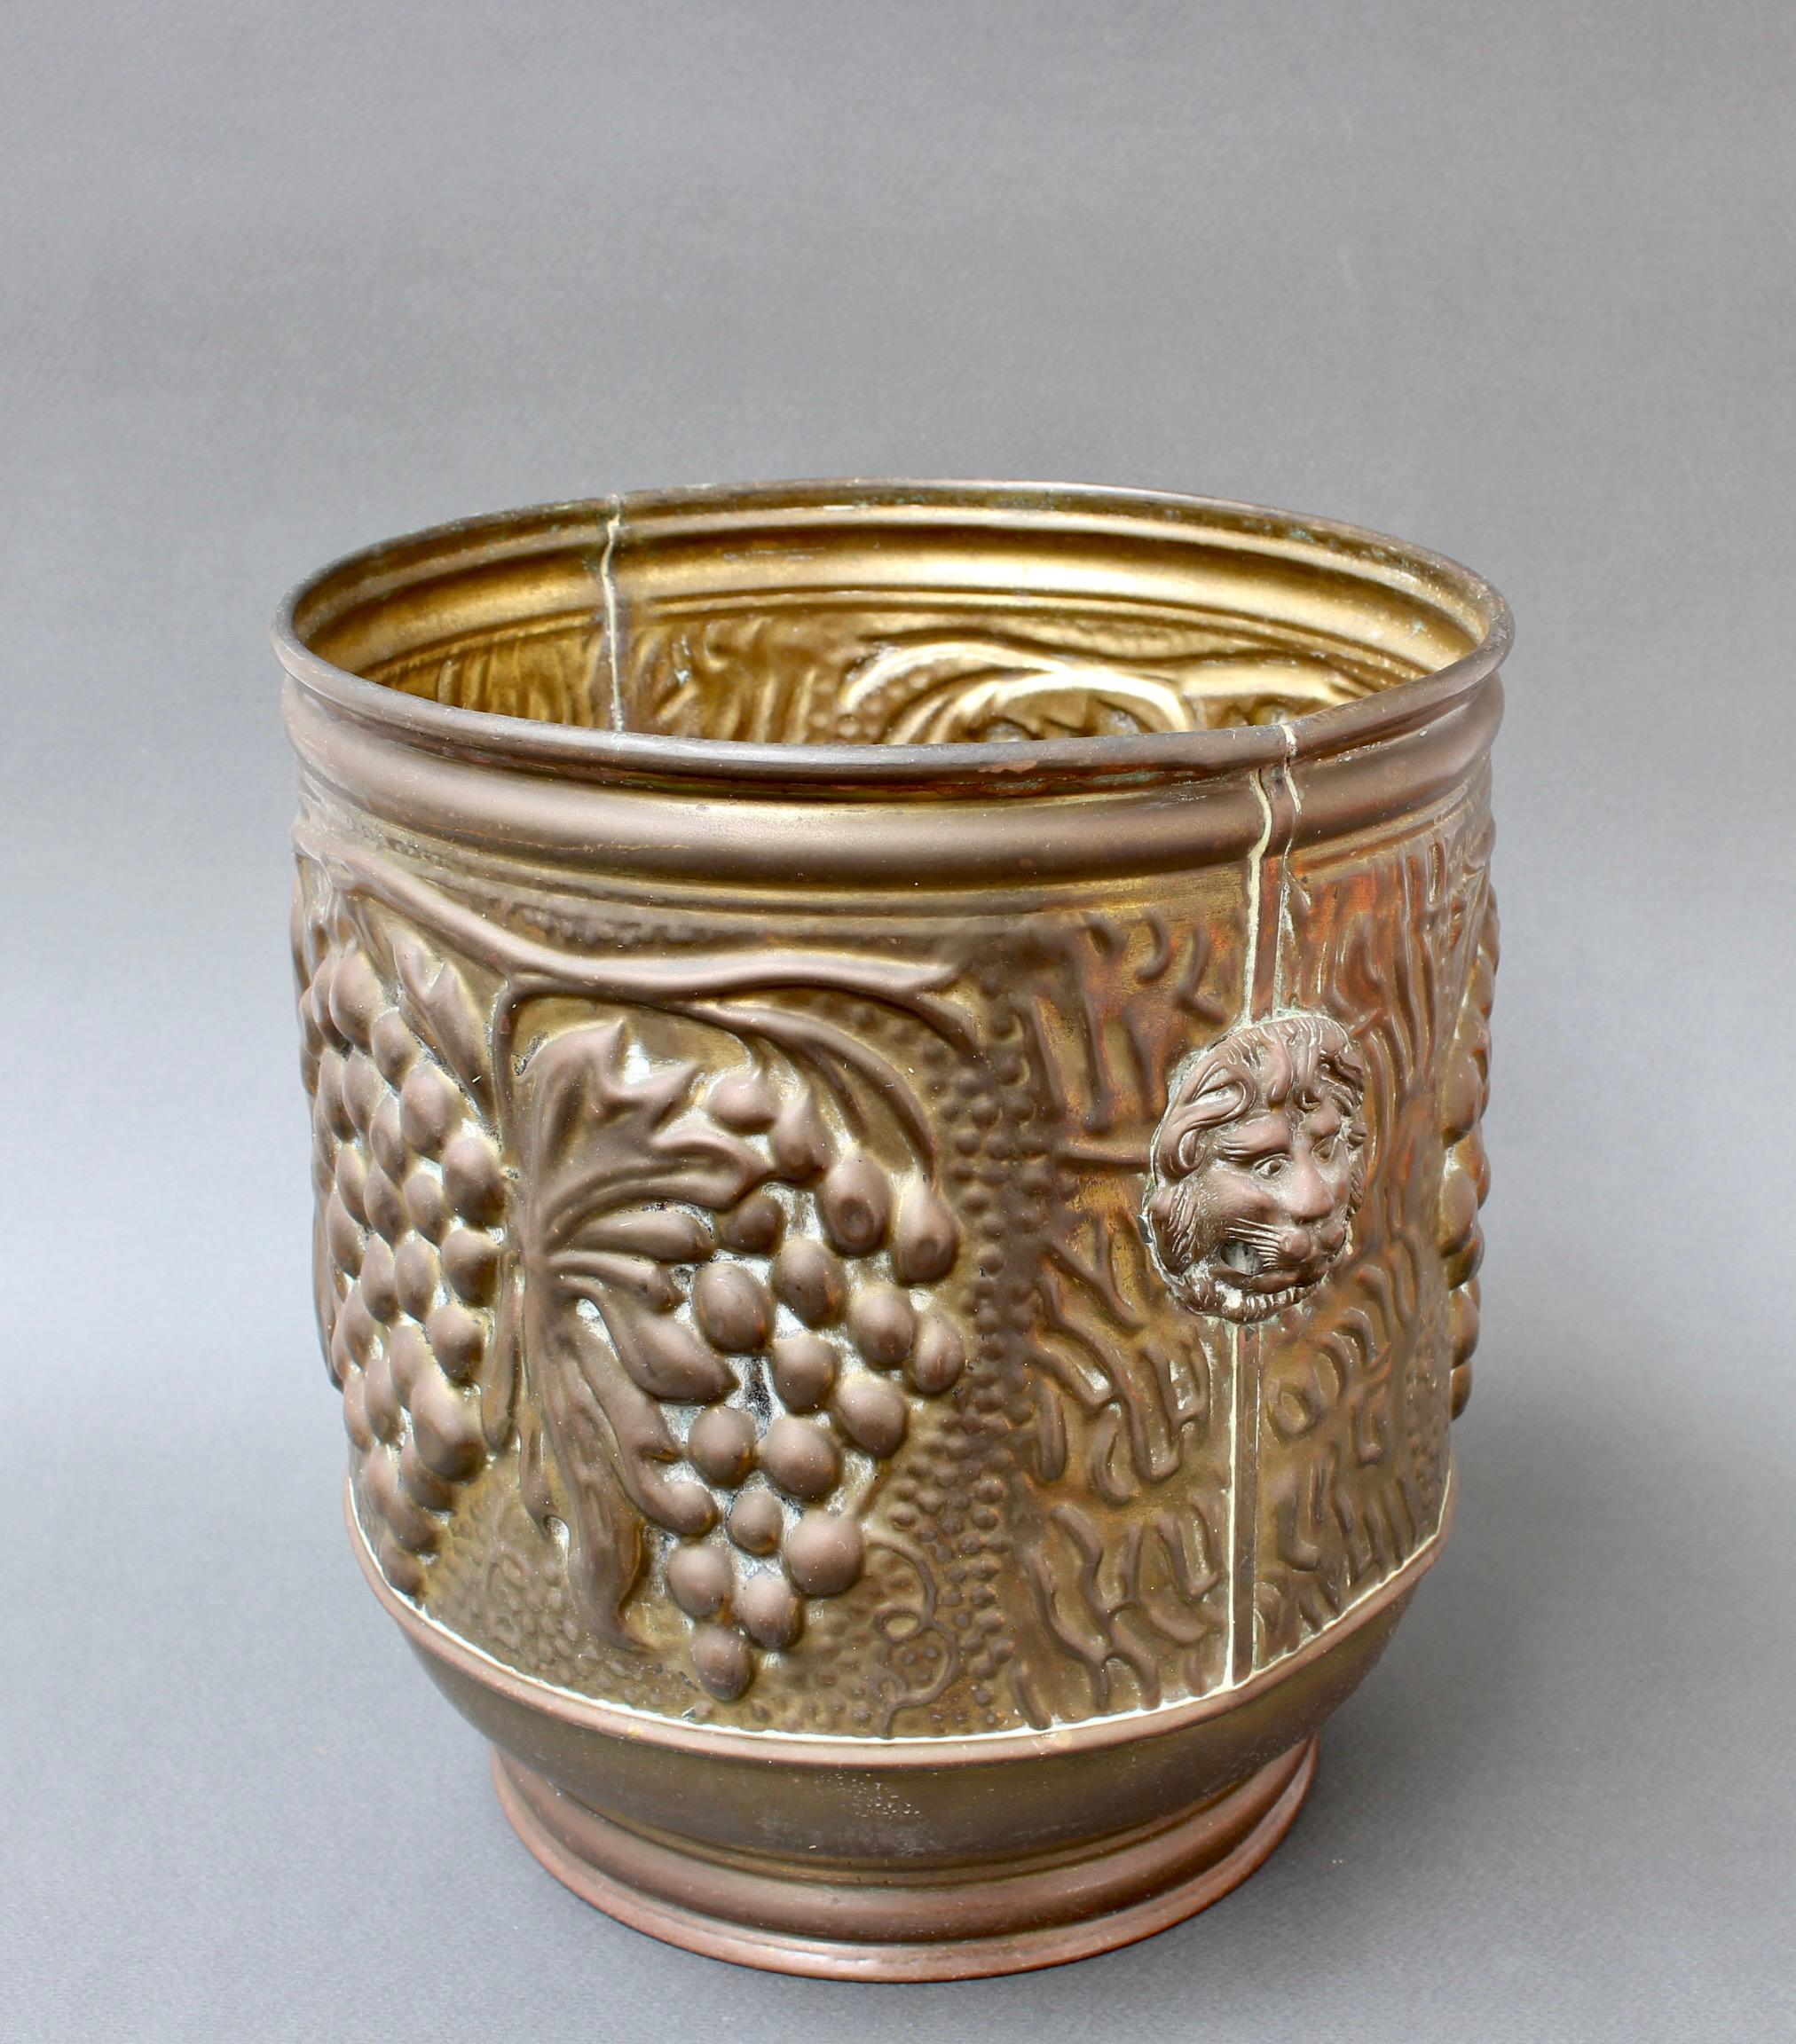 Vintage English metal ice bucket or cachepot (circa 1930s). Lion motif handles accent this interesting vintage piece with grape bunch motif. The piece was originally intended to be used as a wine cooler. It may be also used as a planter or simply as